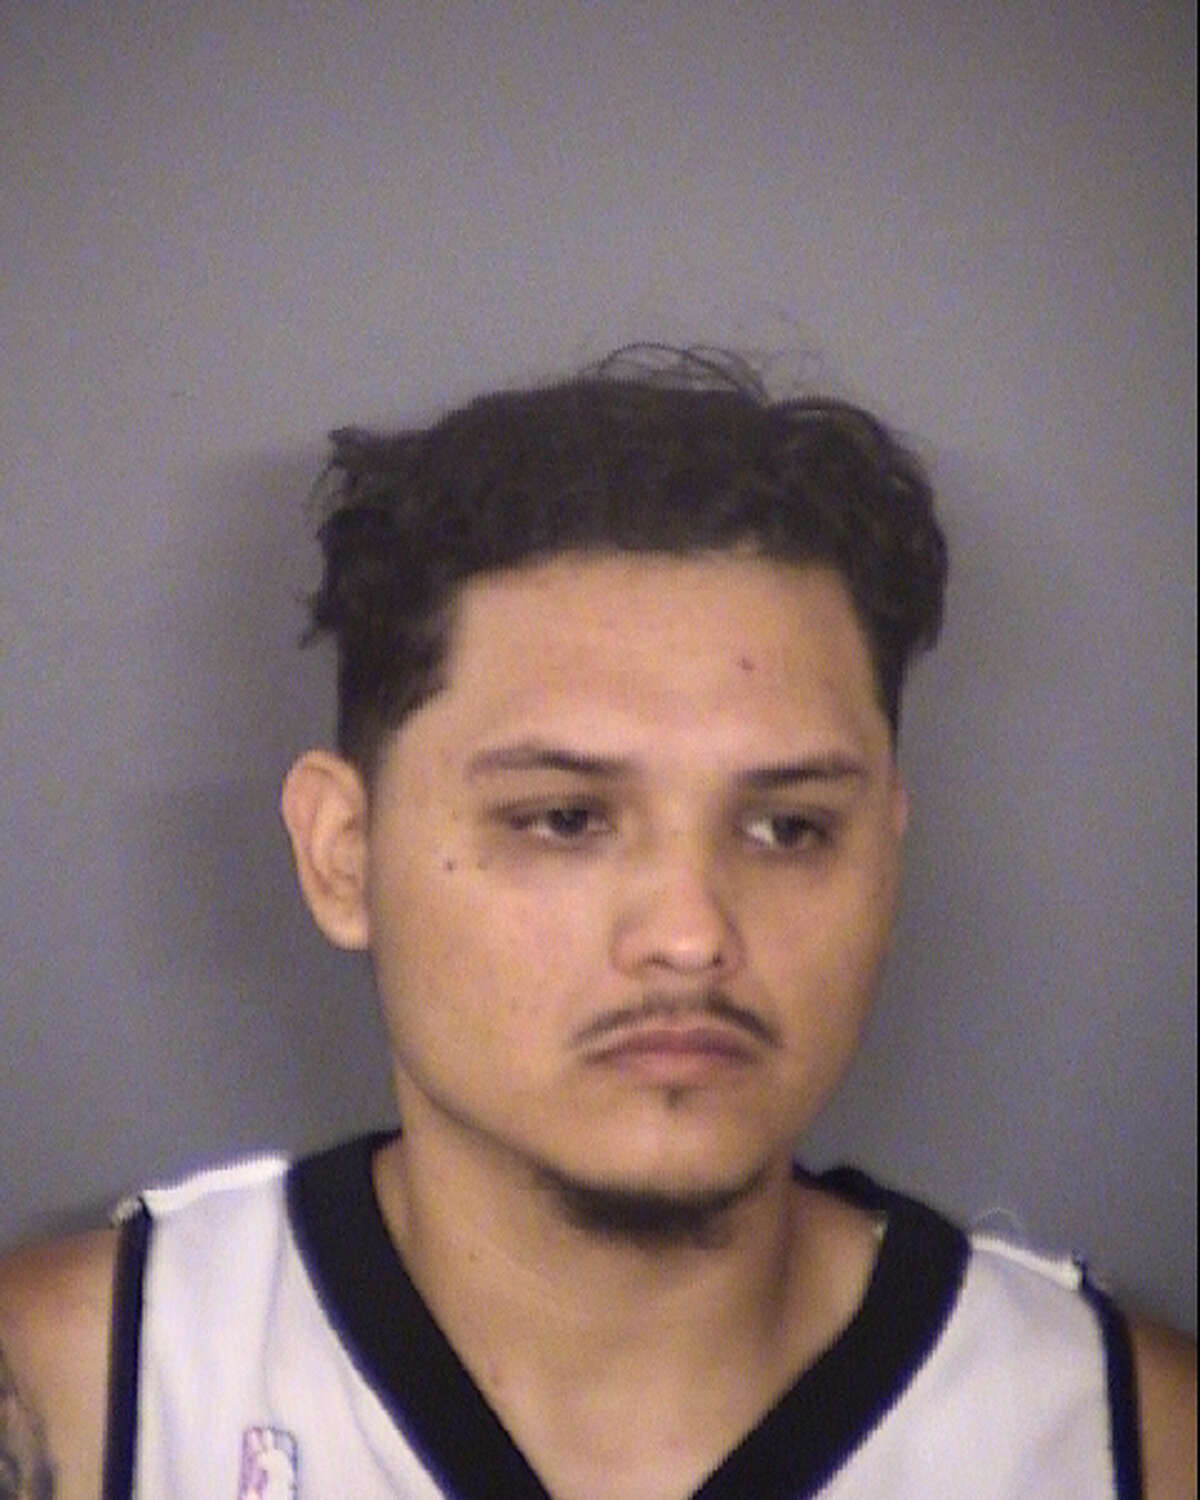 SAPD said David Octavio, 24, is wanted for credit card abuse/elderly and fraudulent use of identifying information/elderly and is a person of interest in the death of Paula Boyd who was found deceased in her apartment on Oct. 21, 2015.